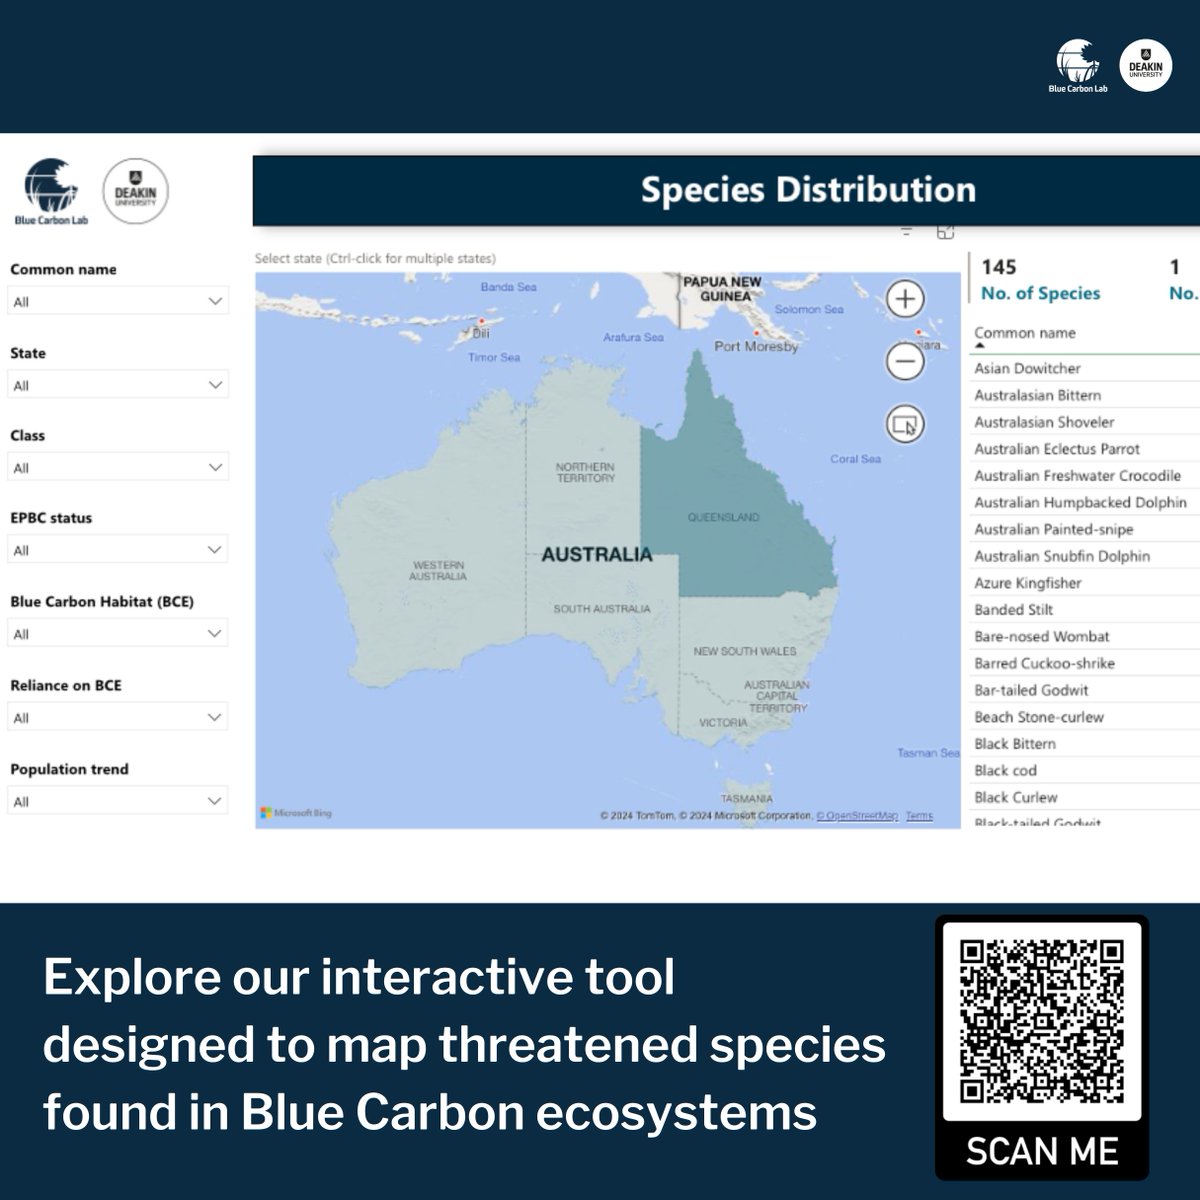 This #BiodiversityDay, we celebrate the rich tapestry of life in #BlueCarbon Ecosystems! We're excited to launch an interactive tool to discover #threatenedspecies in these areas. Ever wondered which reptile uses Queensland's mangroves? Spoiler: It’s the Littoral whiptail-skink🦎